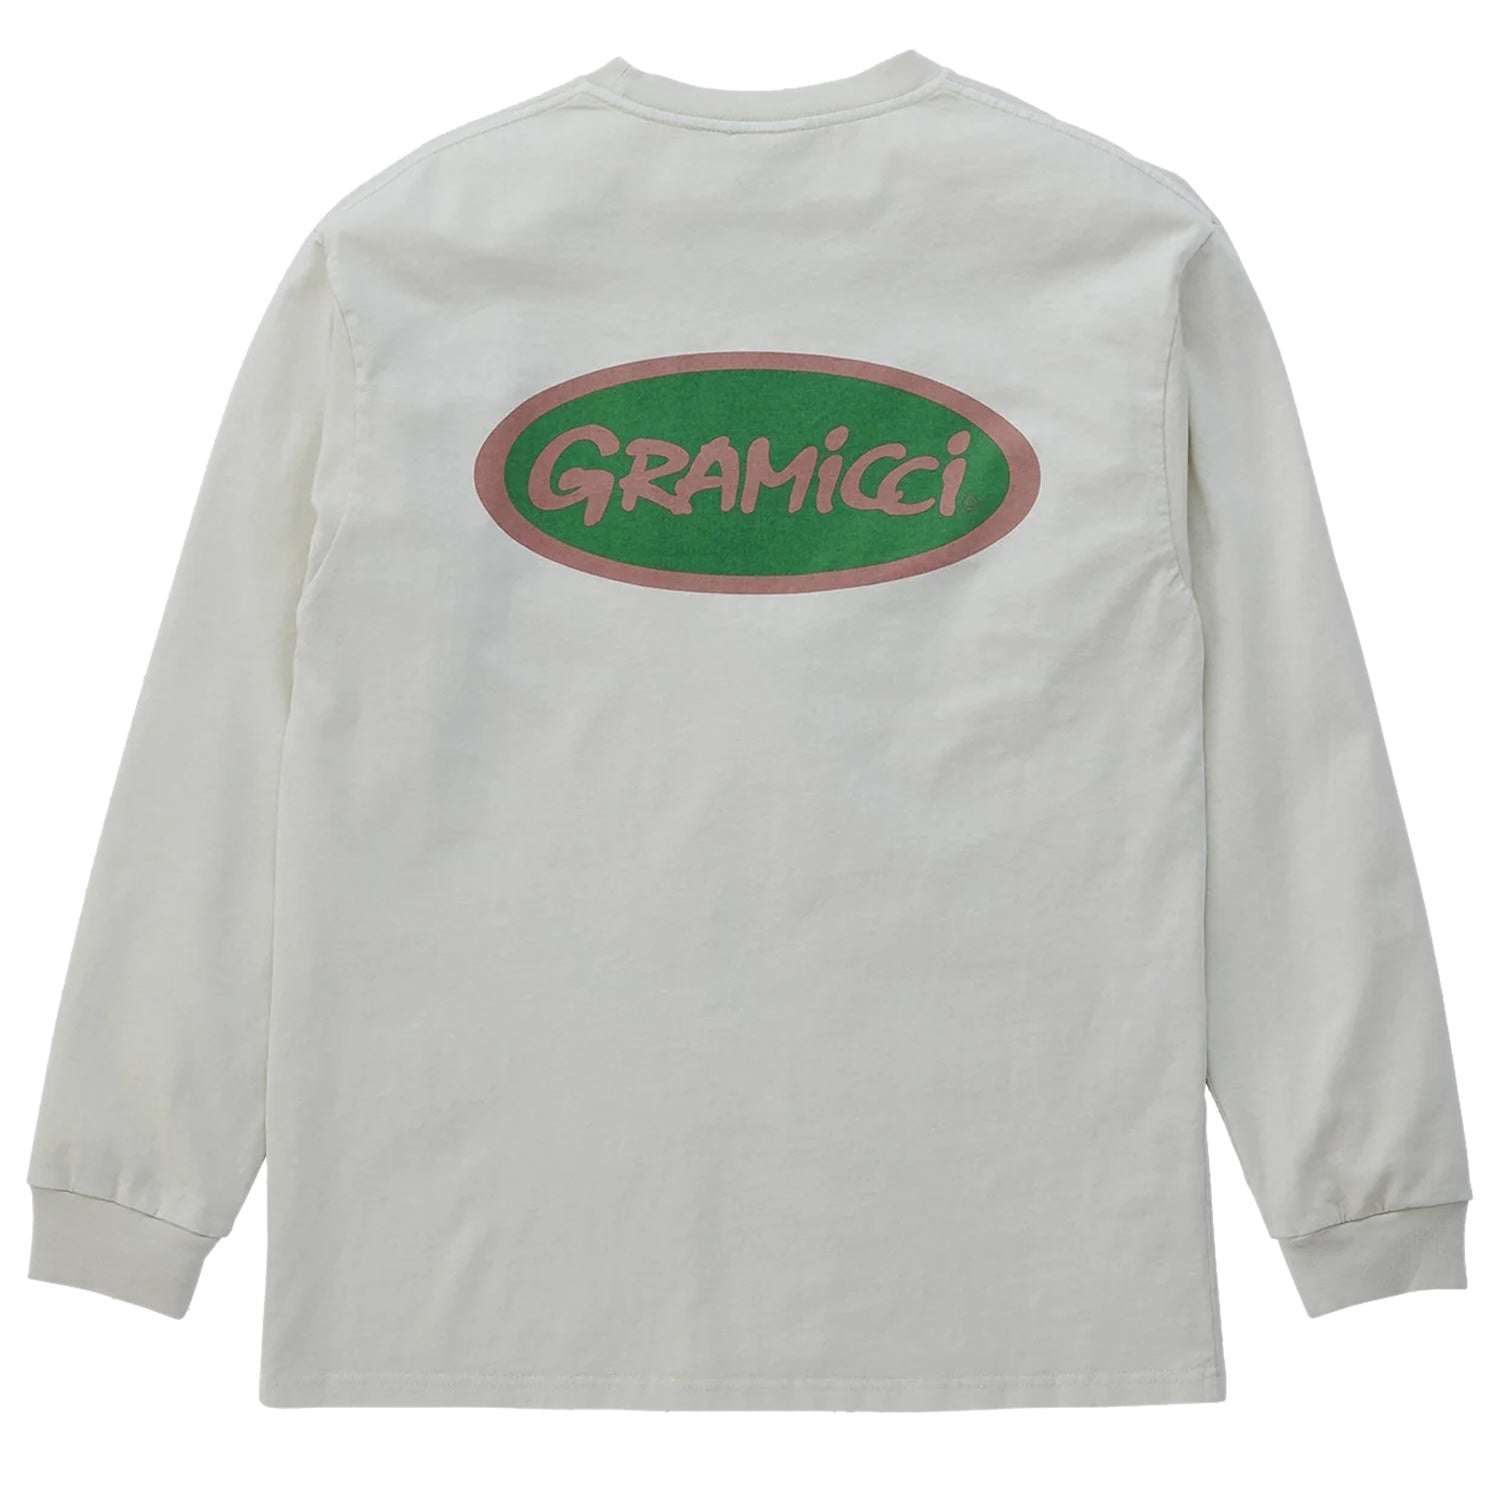 Gramicci Oval Long Sleeve T-Shirt - Sand Pigment